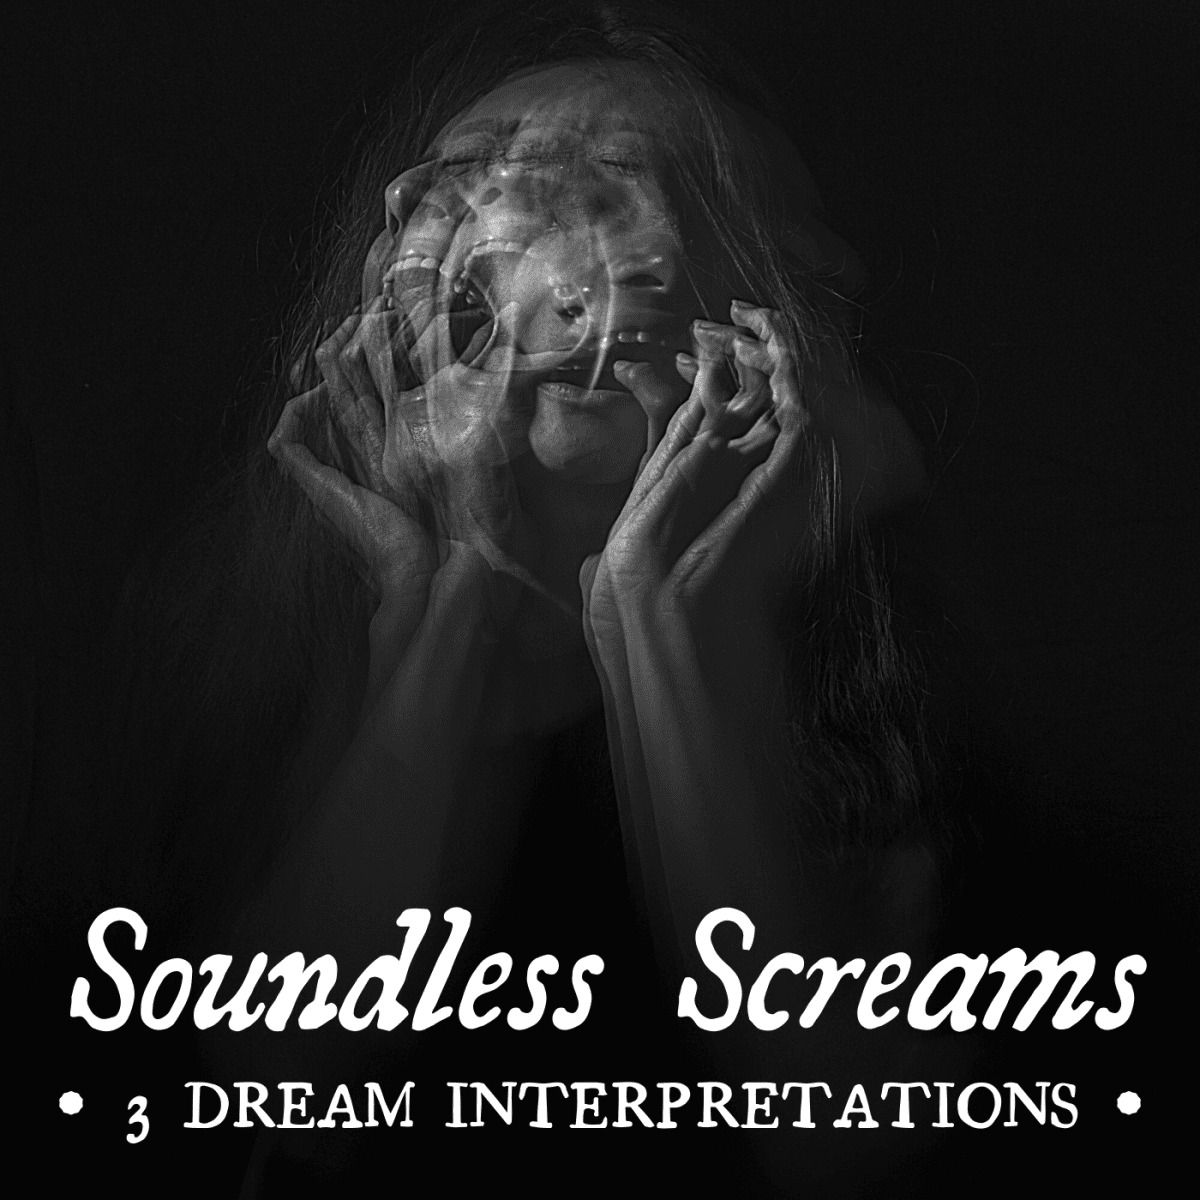 Dreams Of Screaming But No Sound